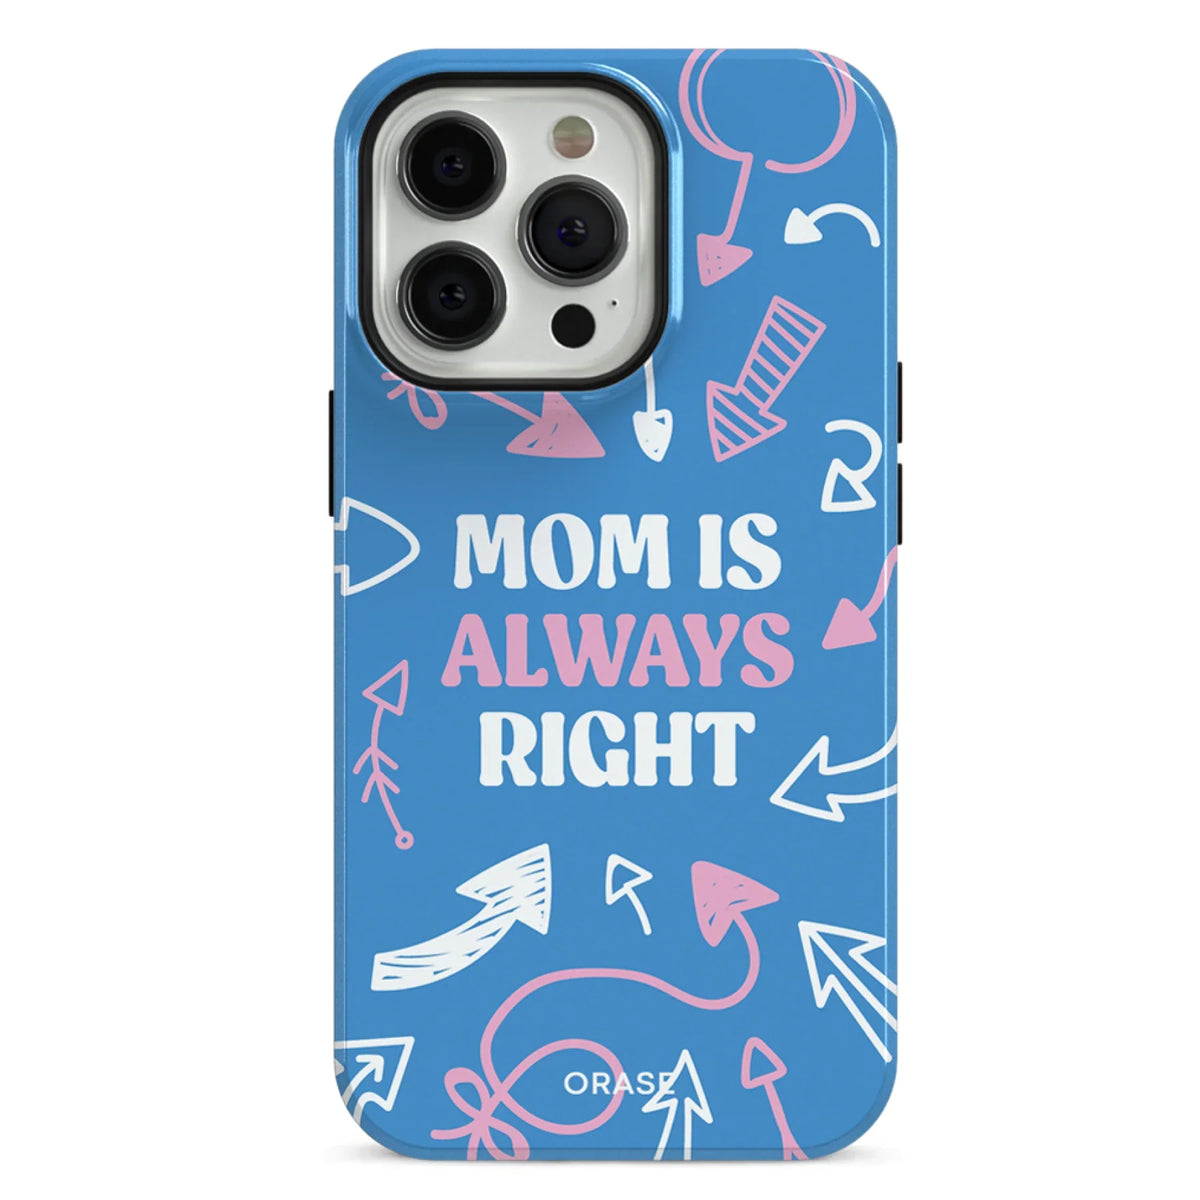 Mom Is Always Right iPhone Case - iPhone 12